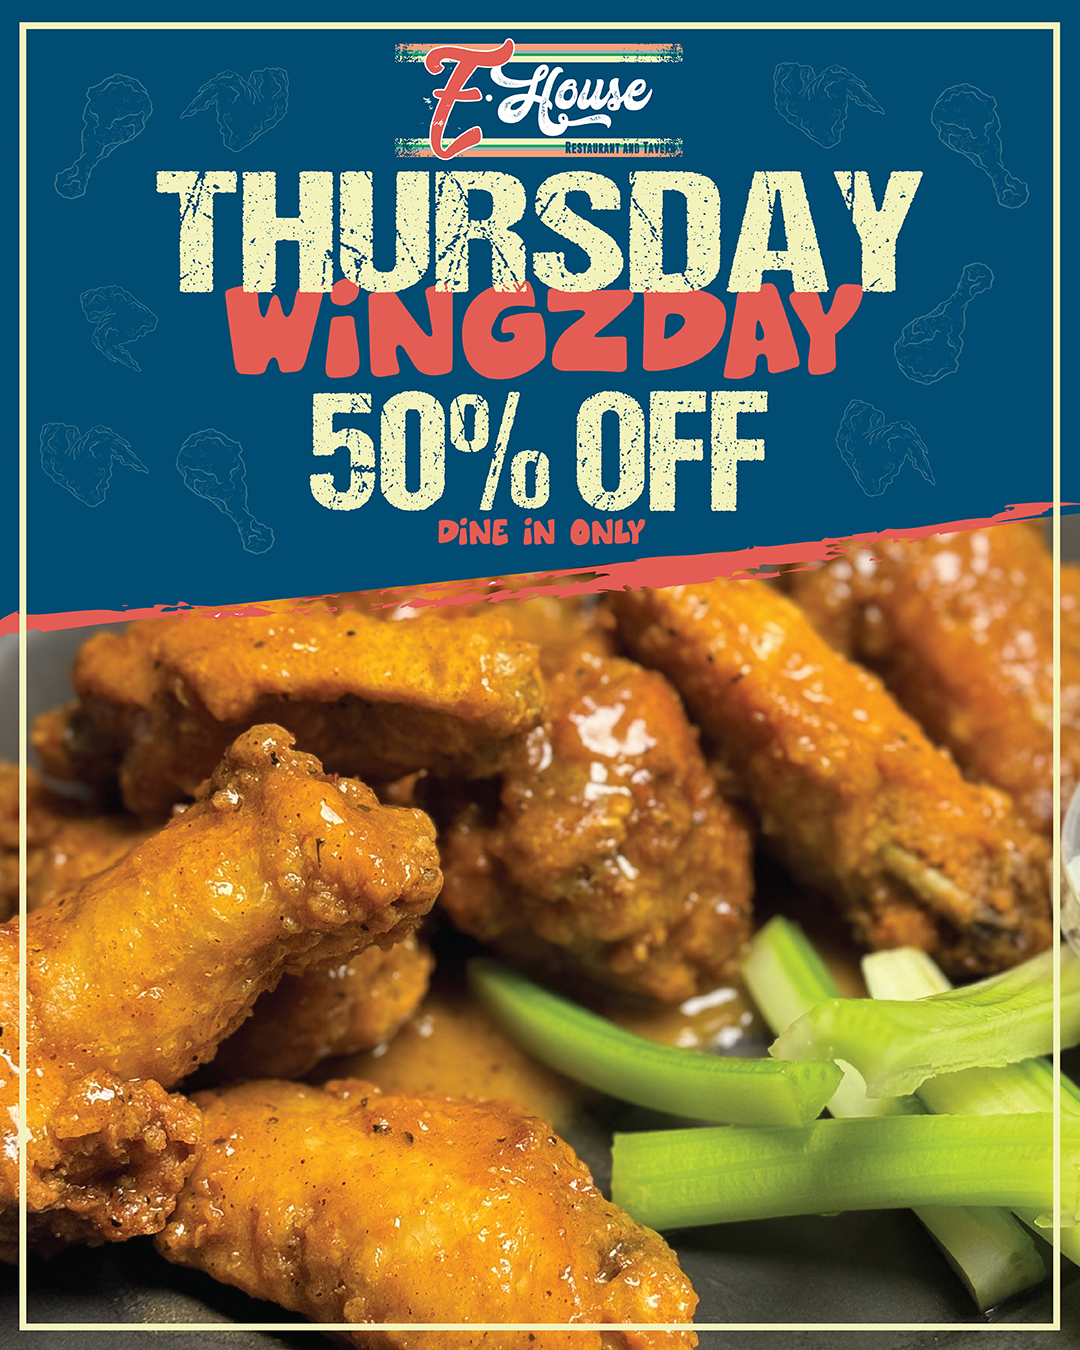 Thursday wing day 50 % off.